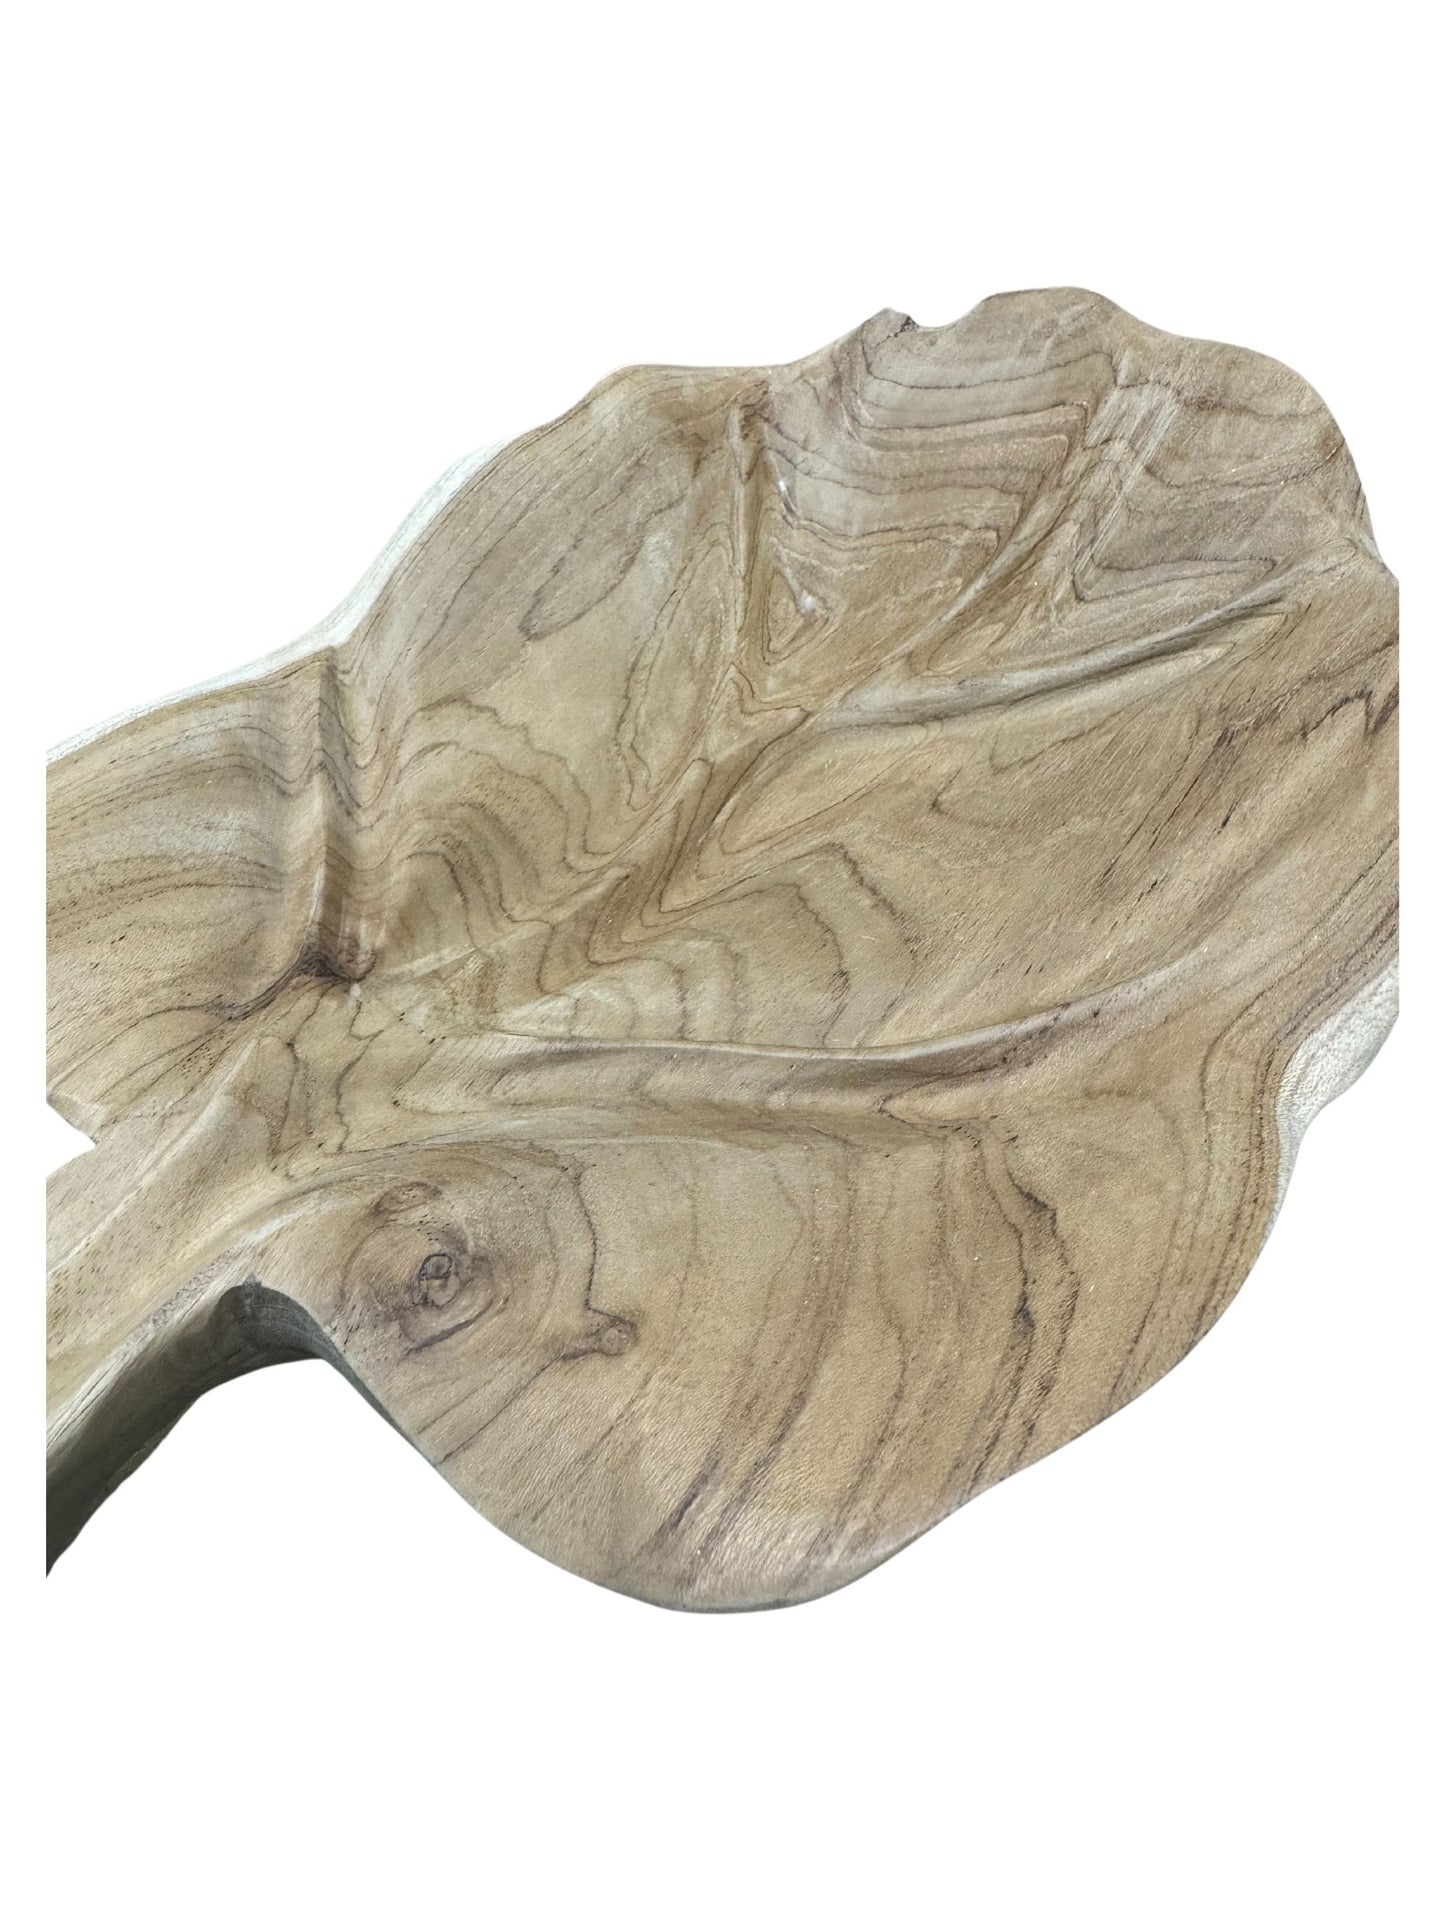 Eclectic Home Accent Teak Leaf Plate 130120 Wooden Decor Furniture